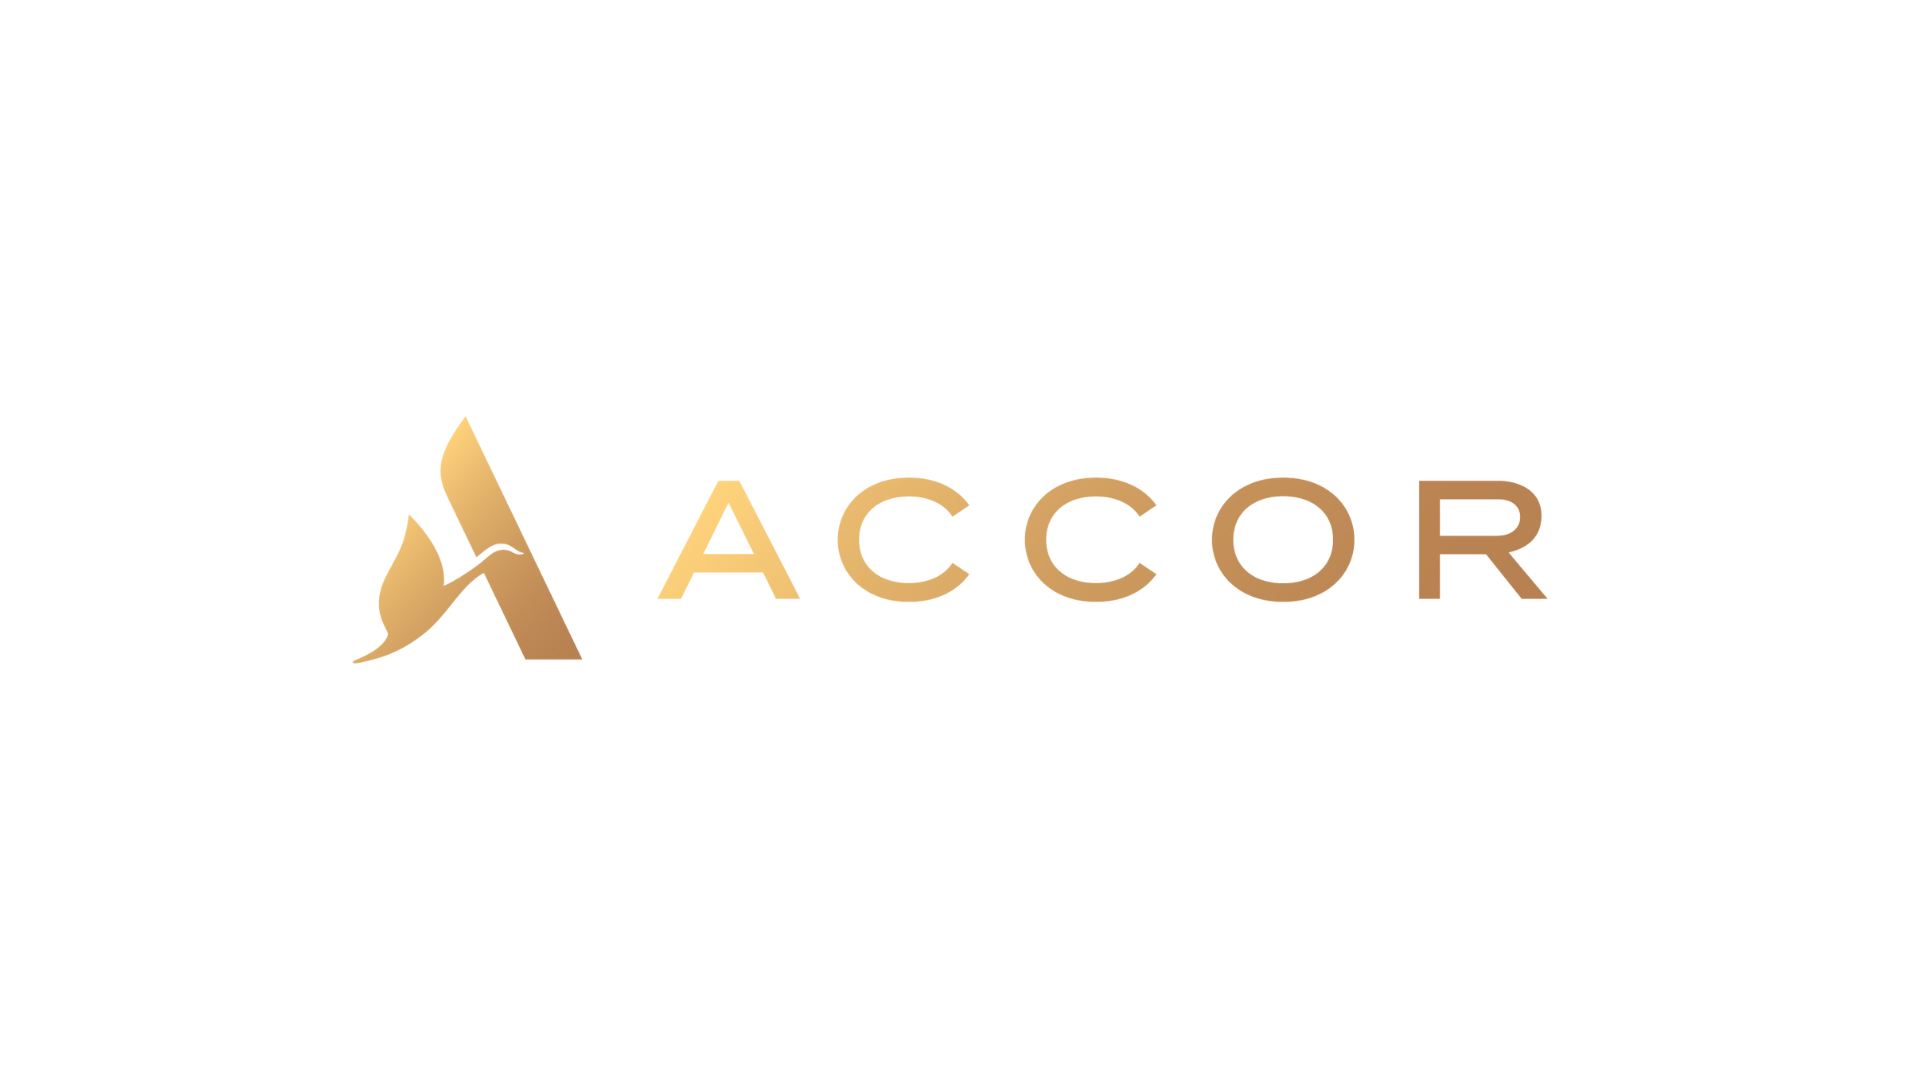 Accor Group Rejoins CAC 40 Index: A Triumph of Resilience